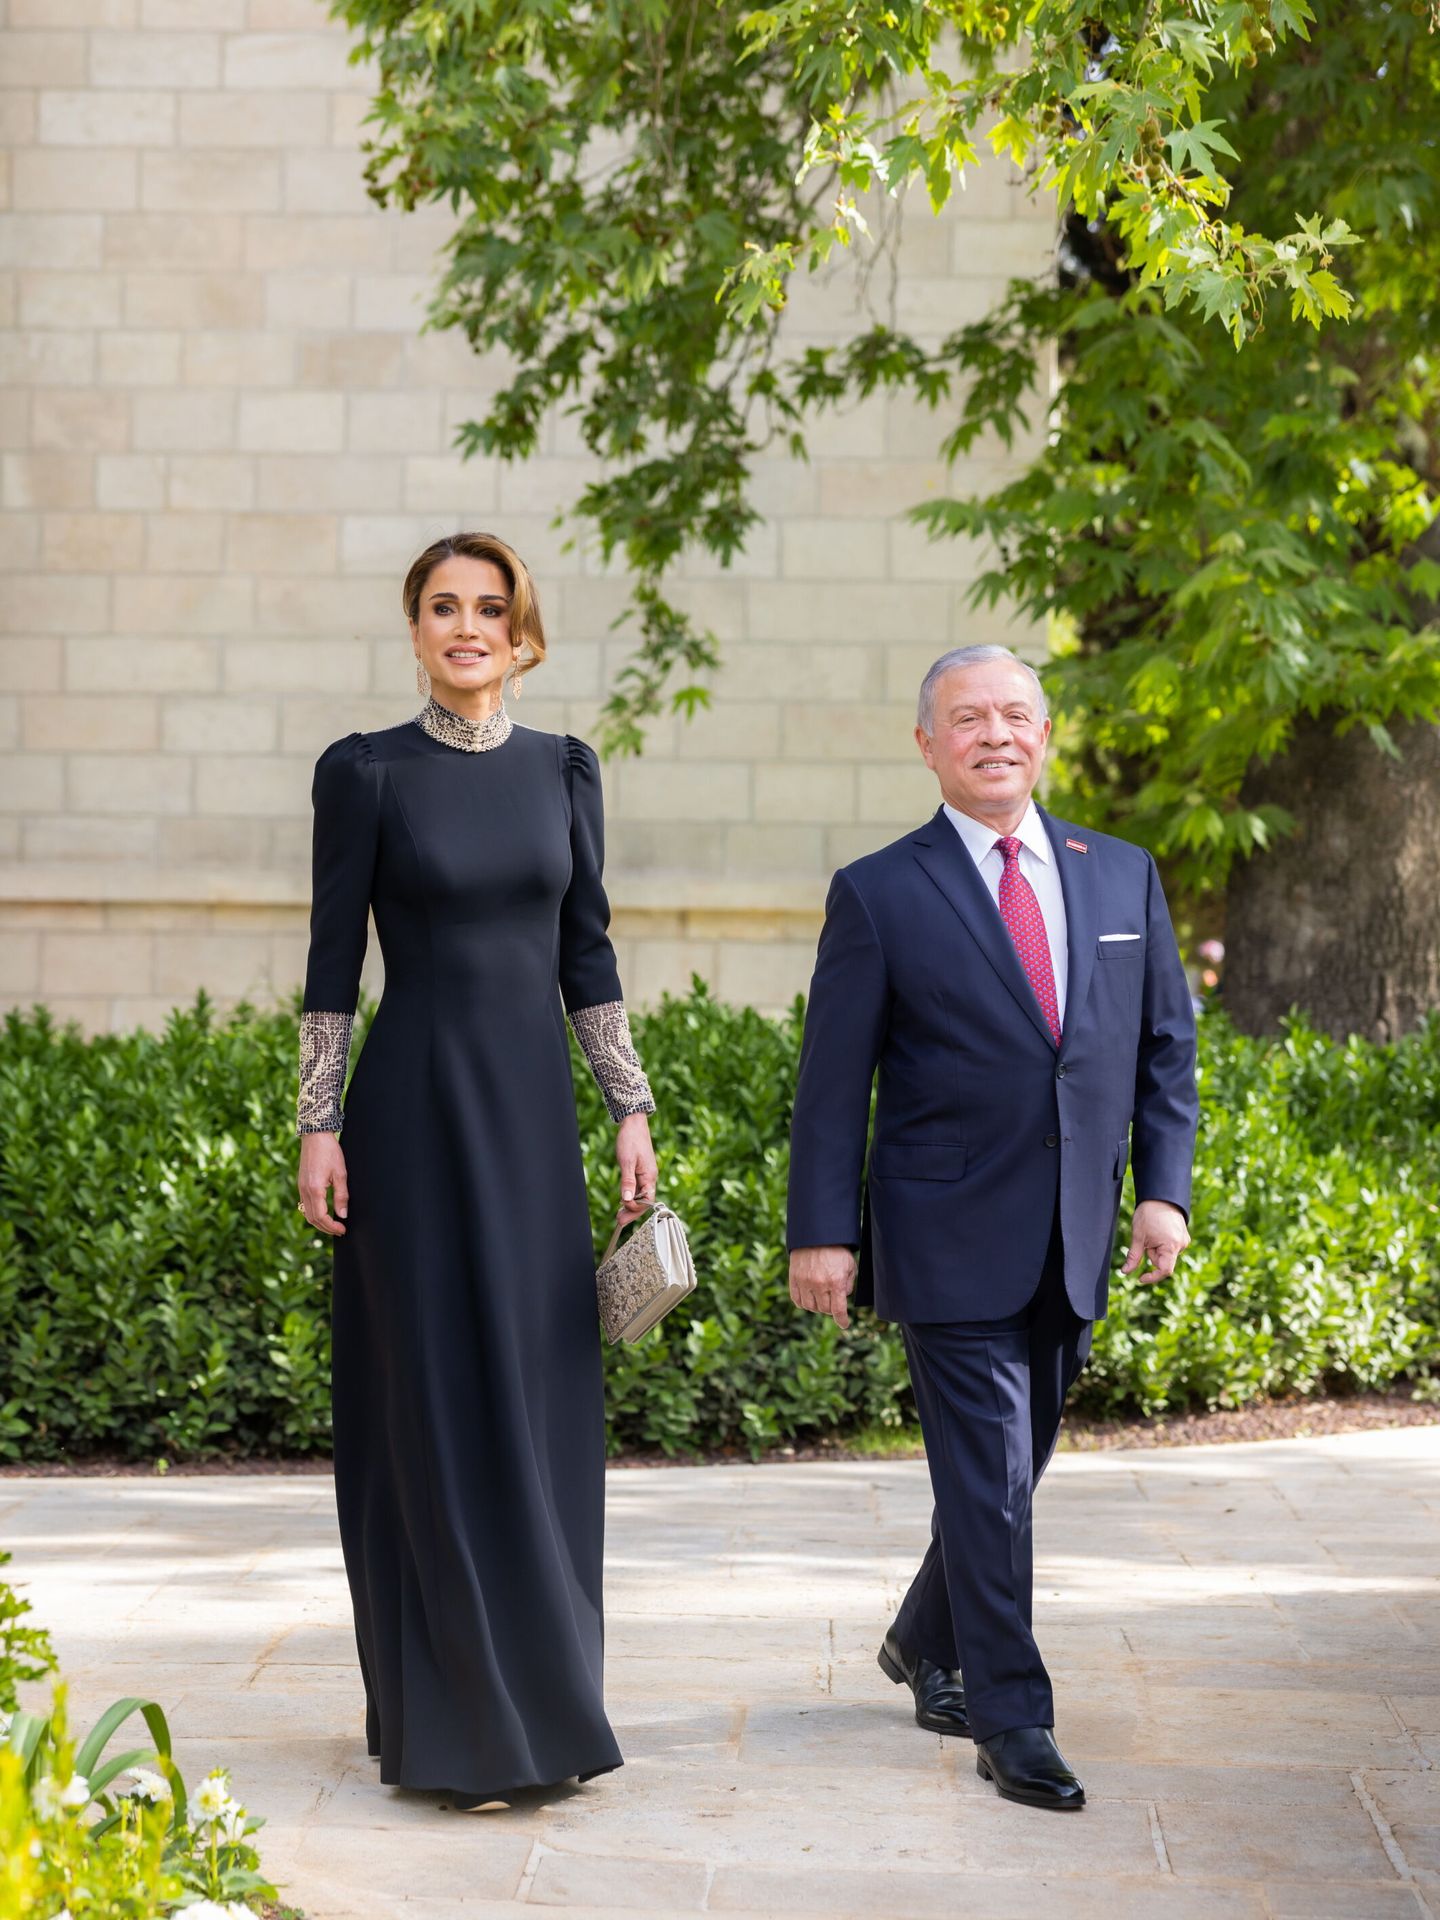 Amman (Jordan), 31 05 2023.- A handout photo made available by the Royal Hashemite Court (RHC) on 01 June 2023 shows Jordan's King Abdullah II (R) and his wife Queen Rania attending the royal wedding ceremony of their son, Jordanian Crown Prince Hussein to his fiancee, Rajwa Al Saif of Saudi Arabia (both not pictured) in Amman, Jordan, 01 June 2023. The wedding was held at Zahran Palace attended by Jordan's king and queen, the parents of the bride, and international royals and heads of state. (Jordania, Arabia Saudita) EFE EPA ROYAL HASHEMITE COURT   HANDOUT HANDOUT EDITORIAL USE ONLY NO SALES 